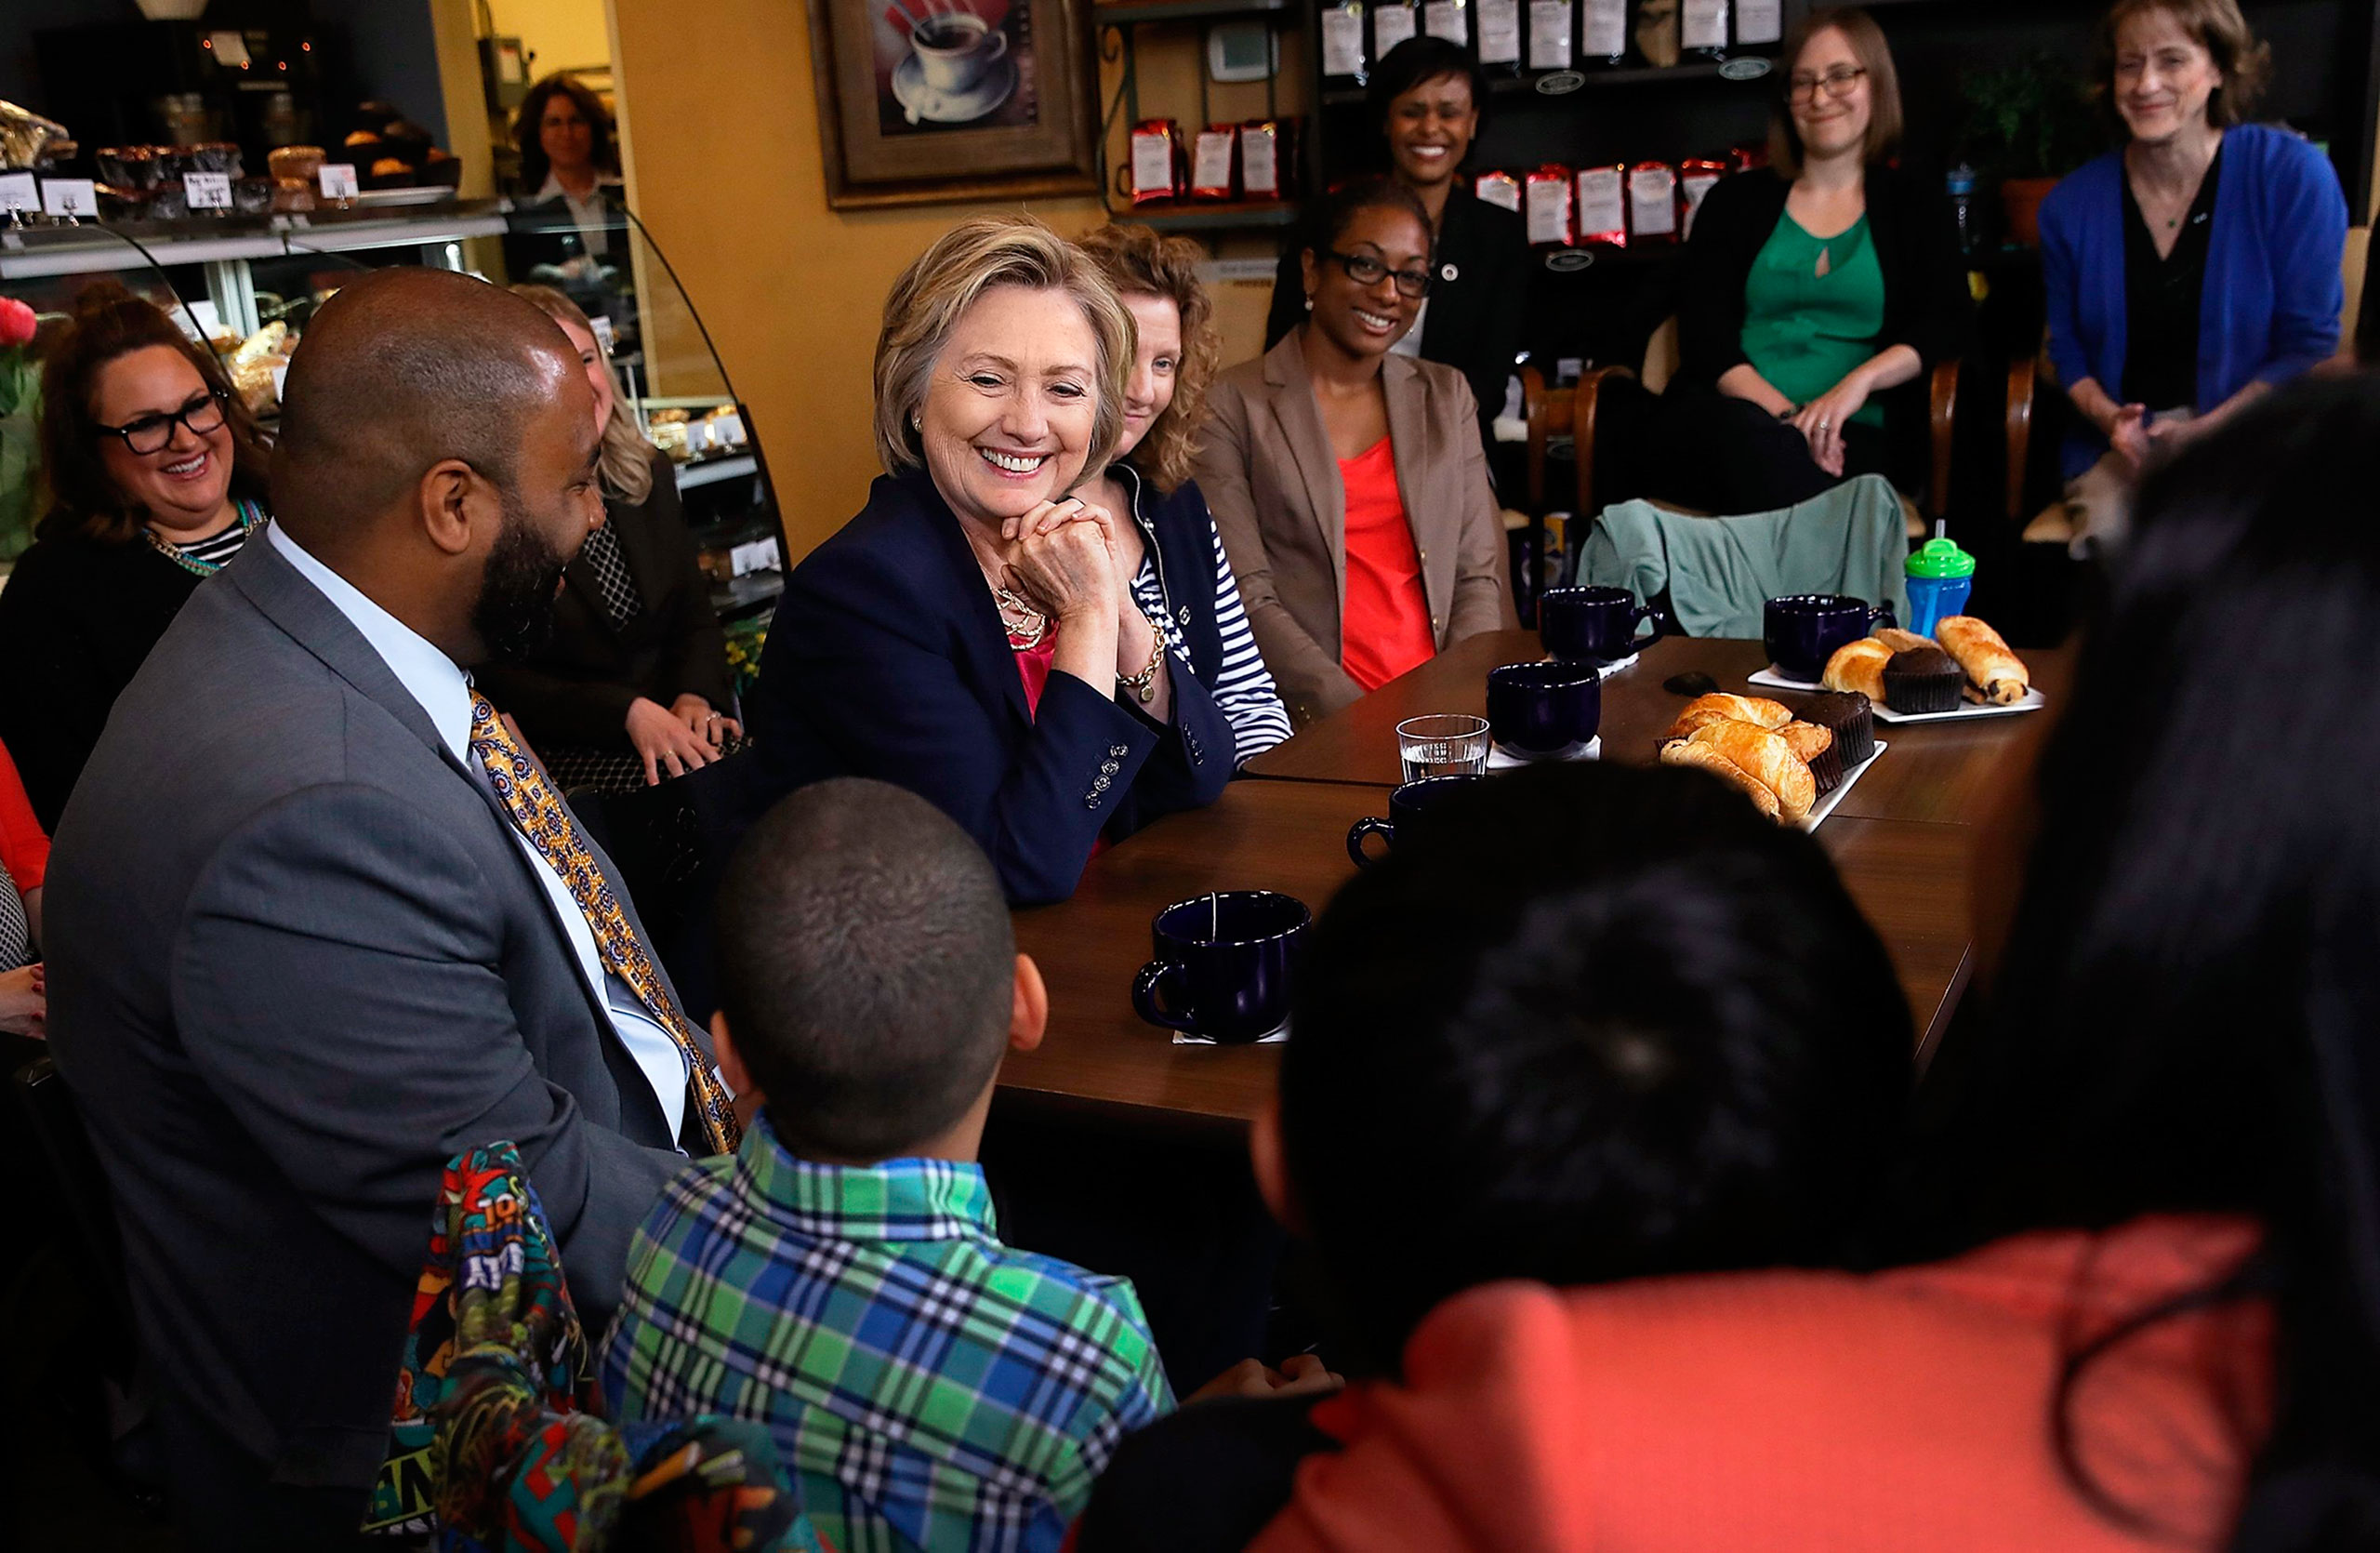 Clinton meets with voters on May 9 at Mug’n Muffin bakery in Aldie, Va. (Win McNamee—Getty Images)